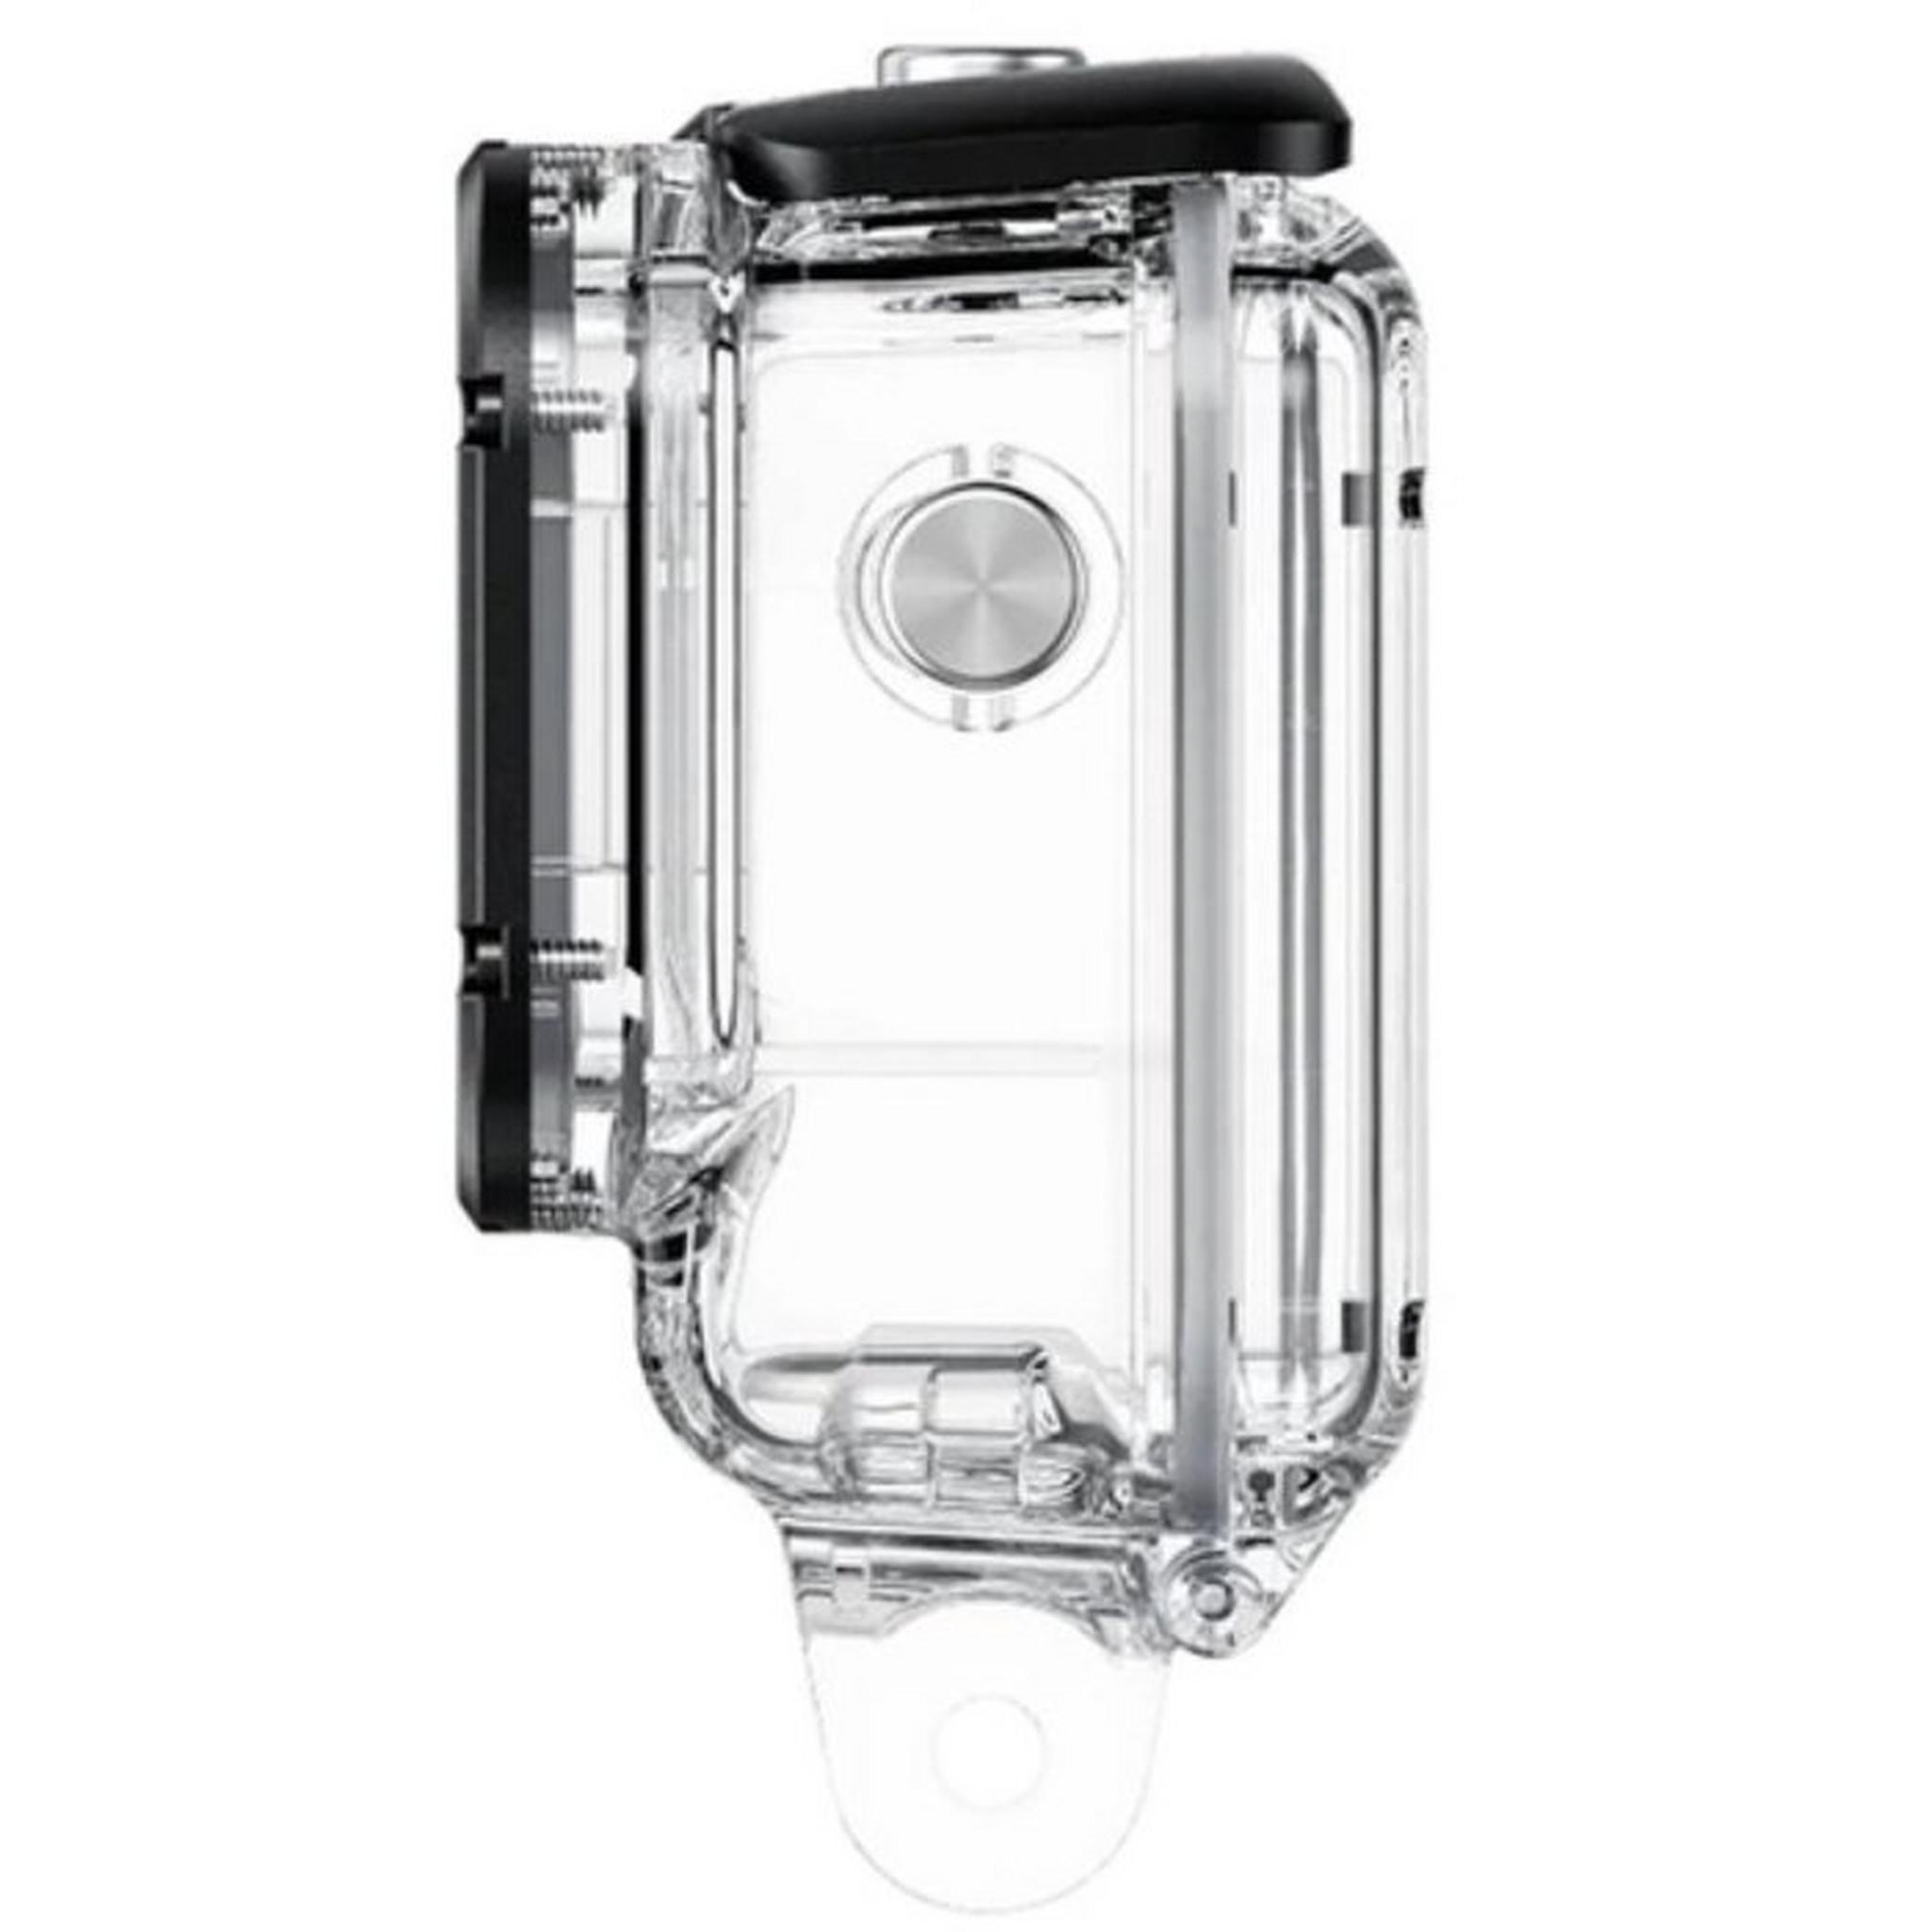 Insta360 Ace Pro Dive Case, Up to 60m /197ft, I04CINSBAJF - Clear